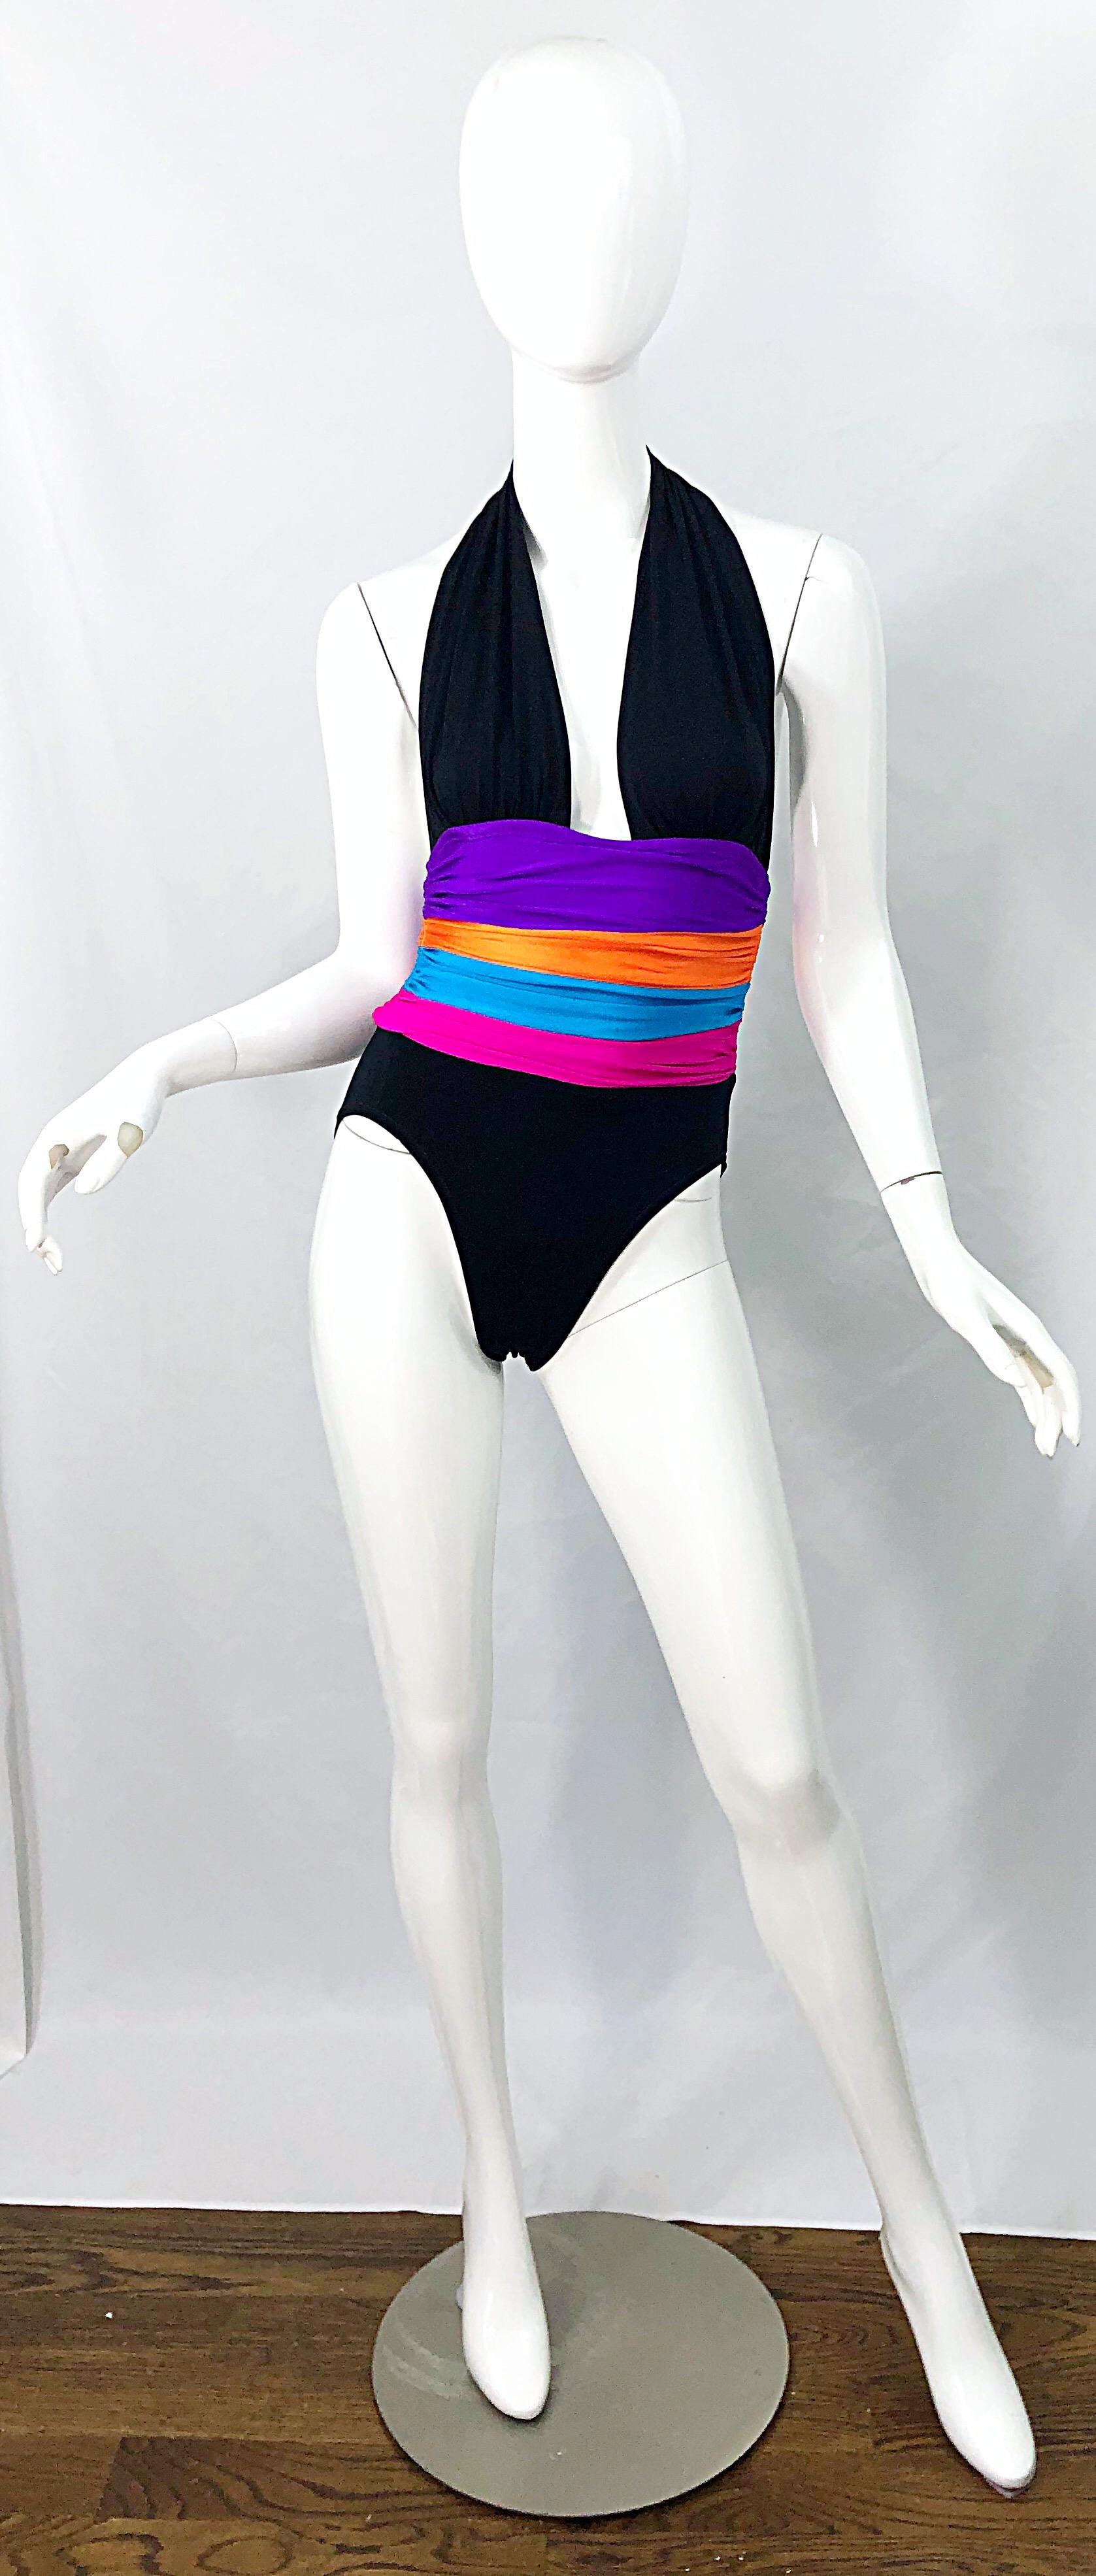 Sexy vintage early 80s YVES SAINT LAURENT YSL for Saks 5th Avenue plunging halter one piece bodysuit or swimsuit ! Swimsuit is a black lycra with color block stripes of purple, neon orange, turquoise blue and hot pink below the bust. Clasp at back